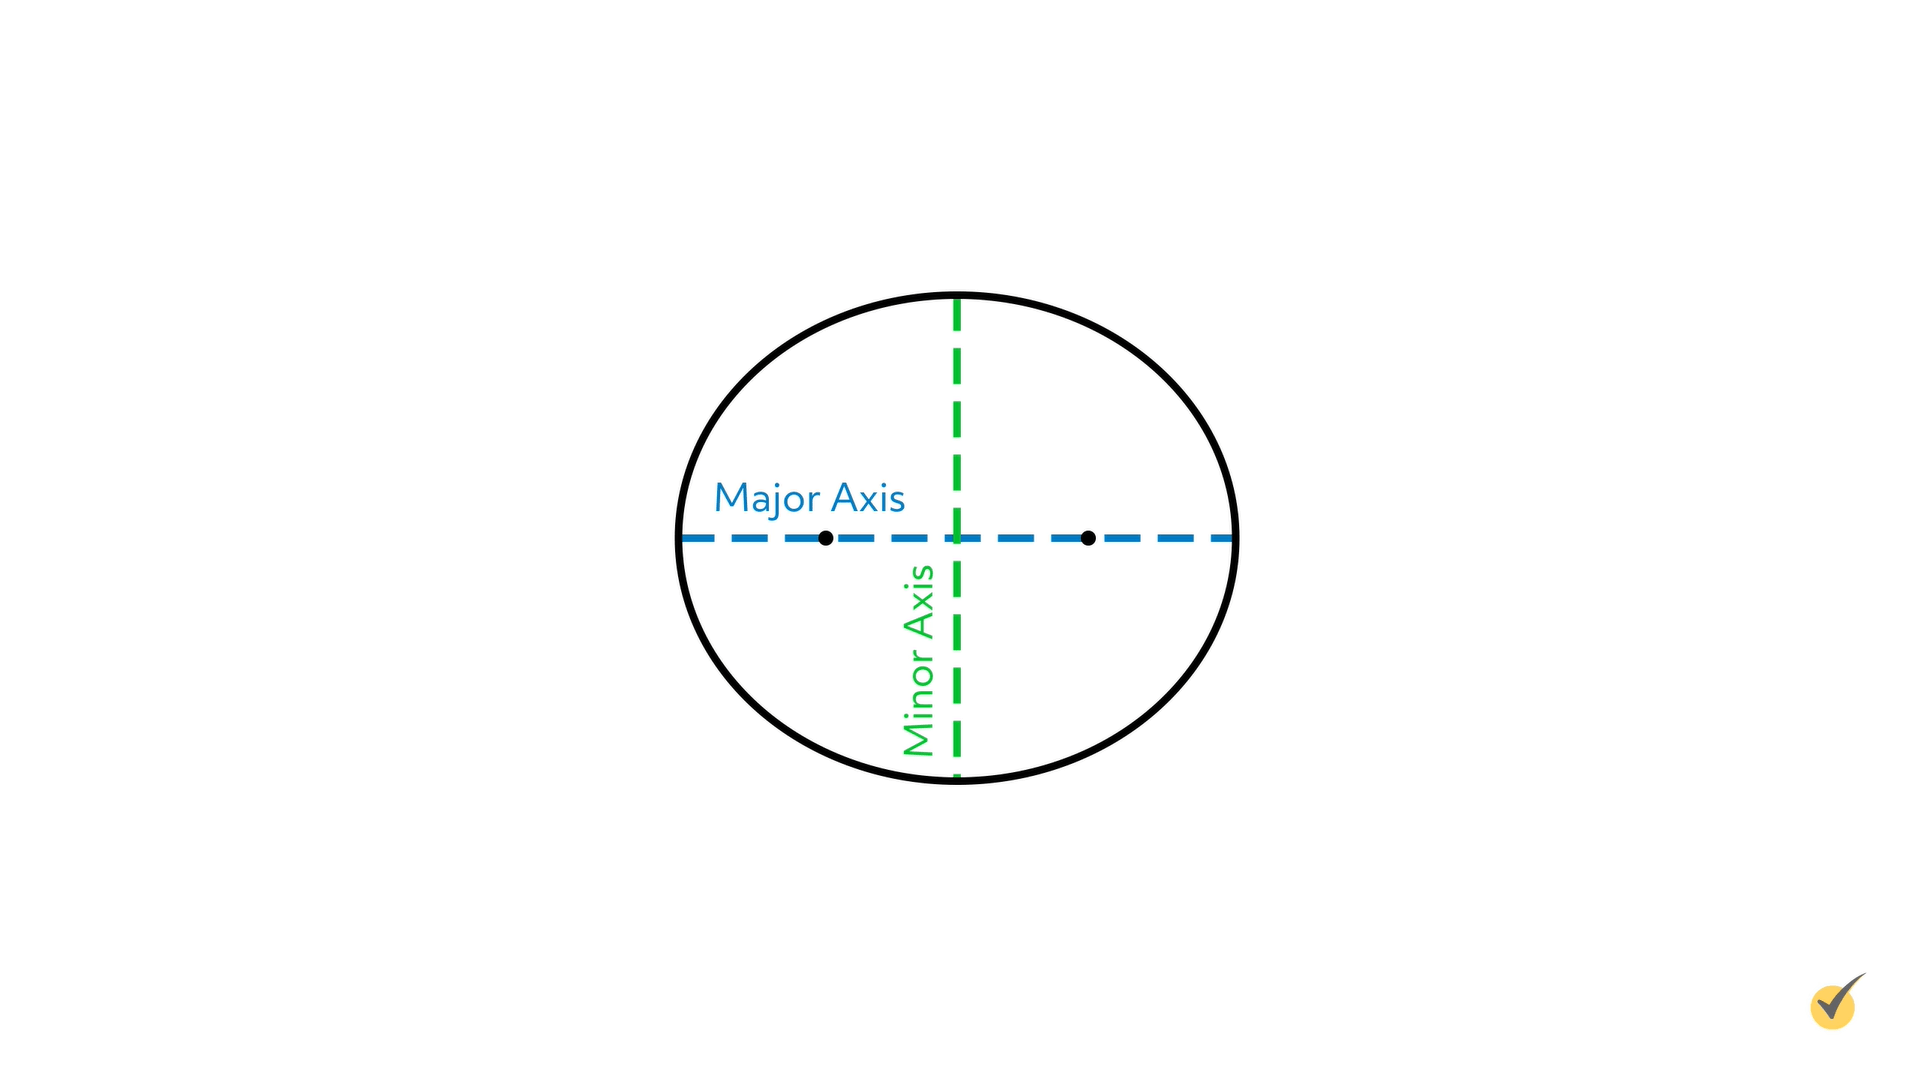 An ellipse that is less squashed and more circular